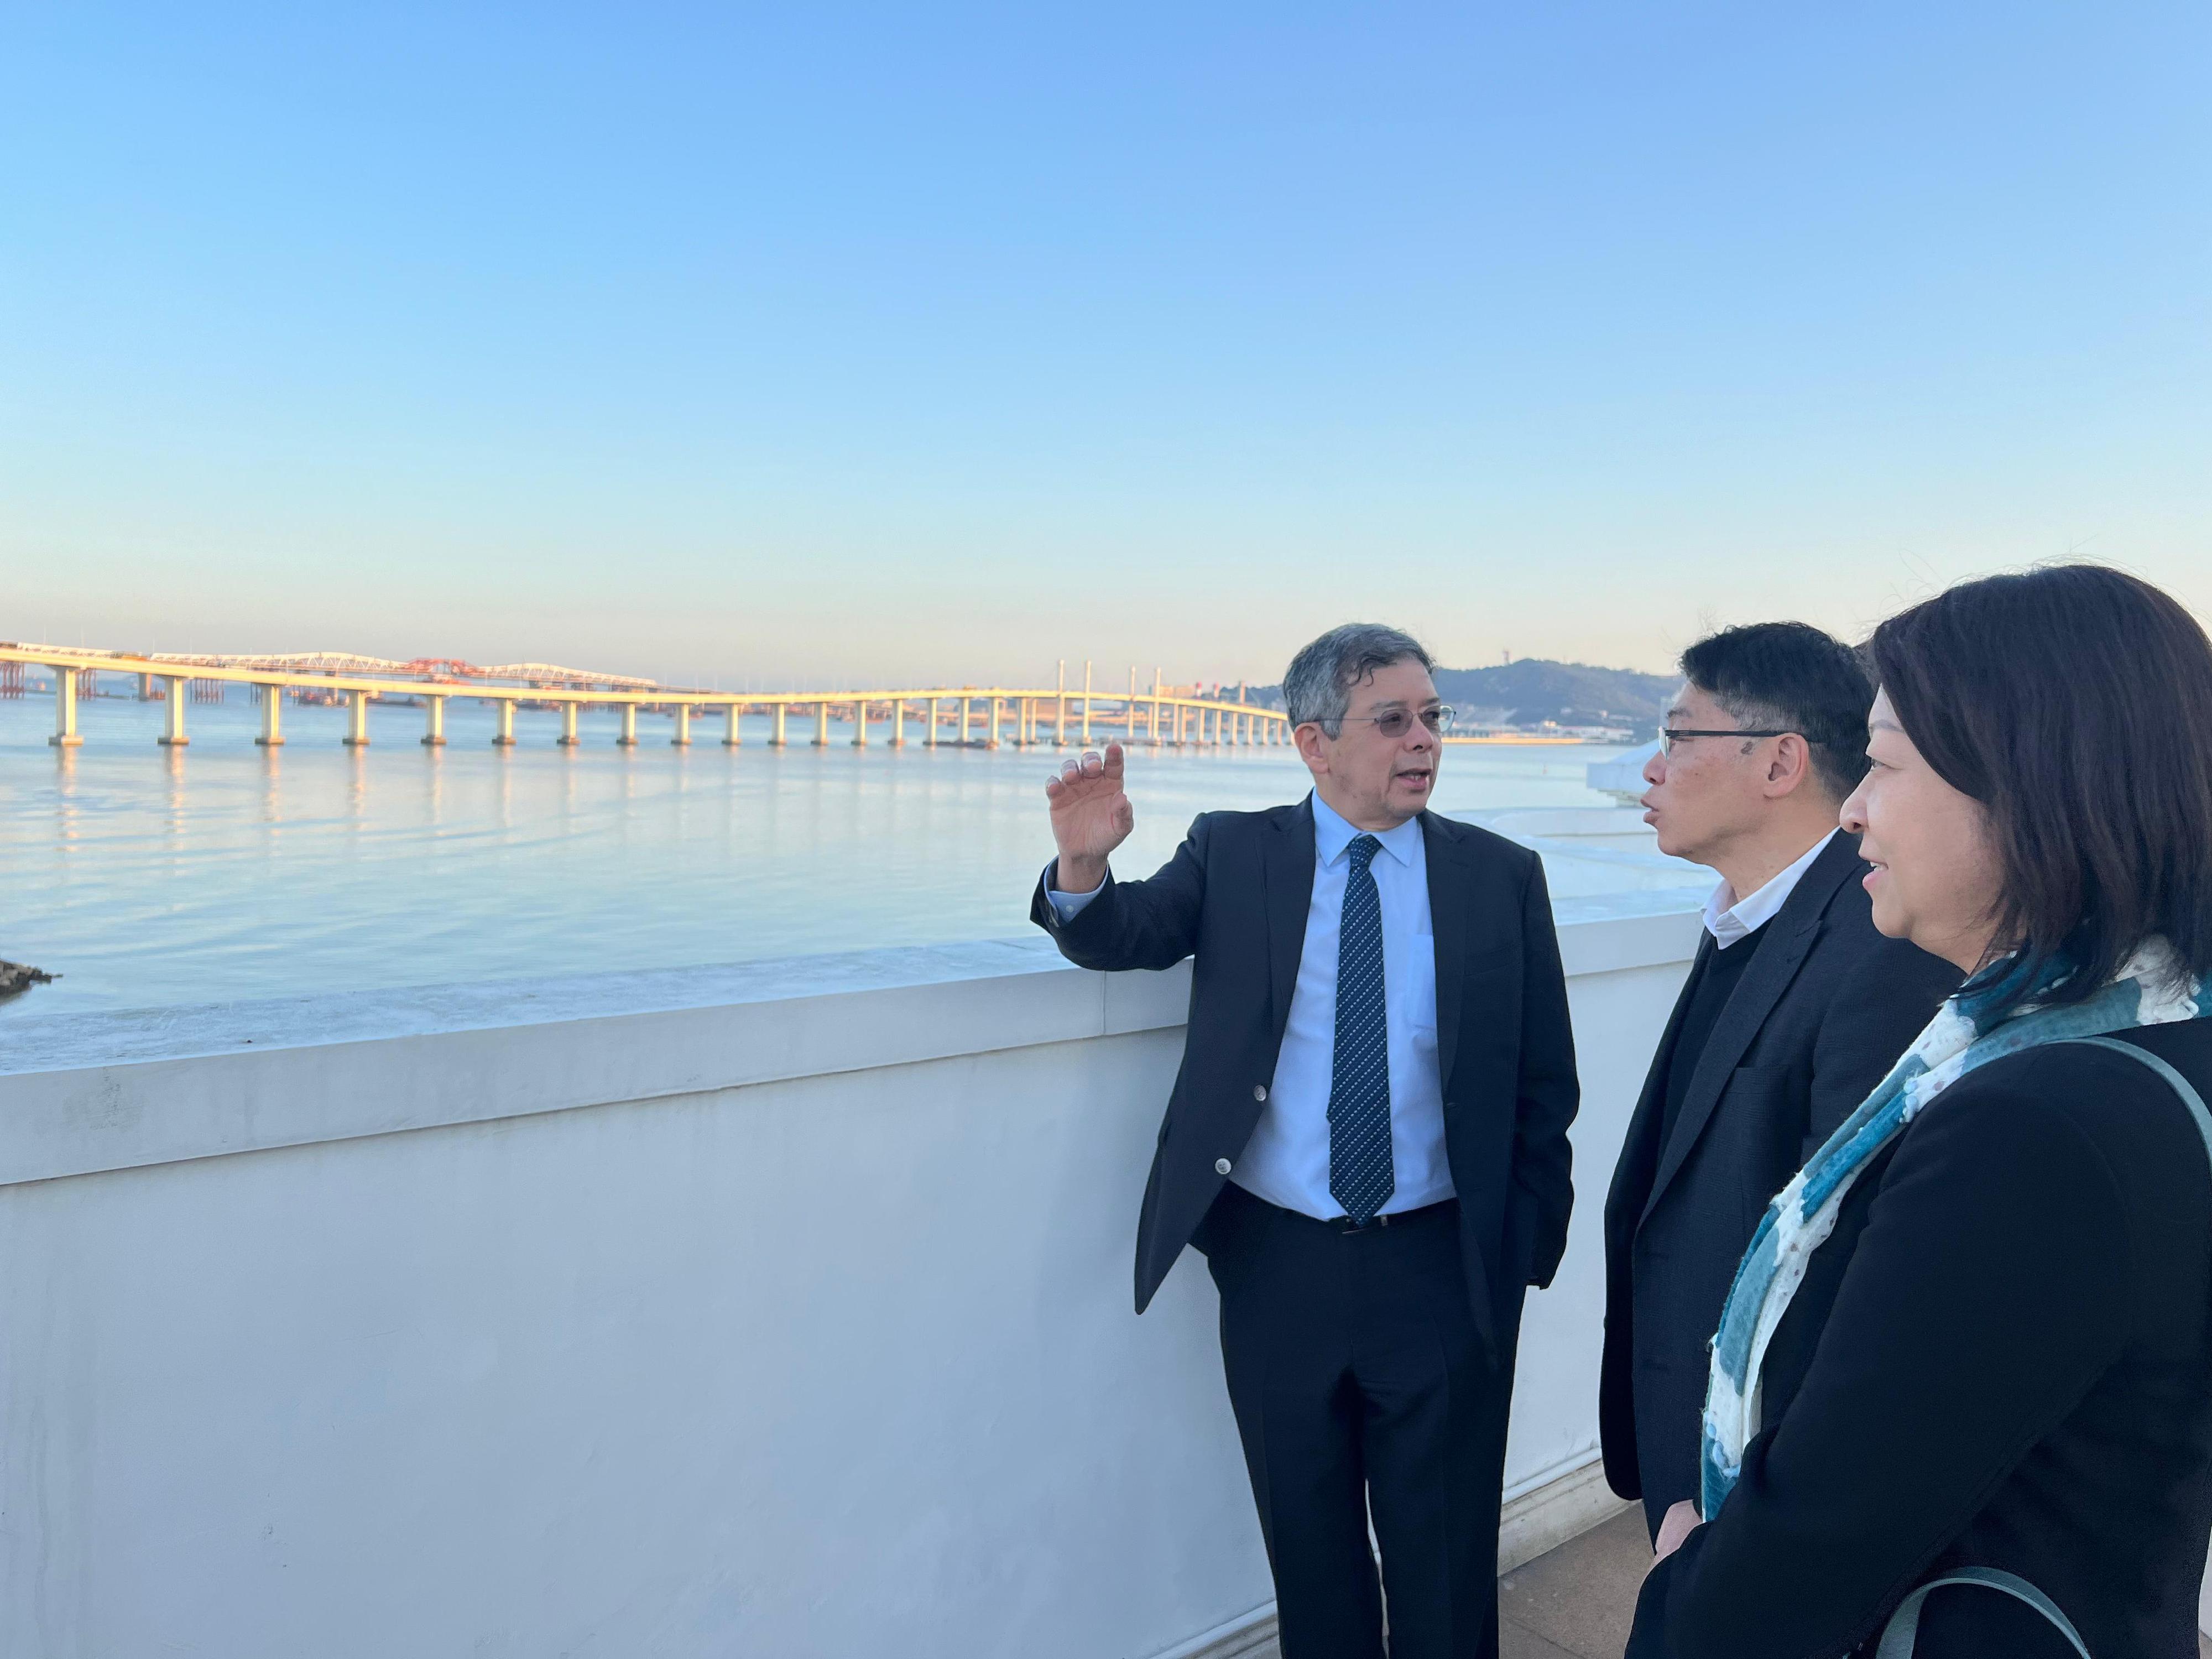 The Secretary for Transport and Logistics, Mr Lam Sai-hung, visited Zhuhai and Macao today (March 12). Photo shows Mr Lam (centre) being briefed by the Secretary for Transport and Public Works of Macao, Mr Raimundo Arrais do Rosário (left), on the latest developments of the Macao-Taipa bridges. Also present is the Commissioner for Transport, Ms Angela Lee (right).